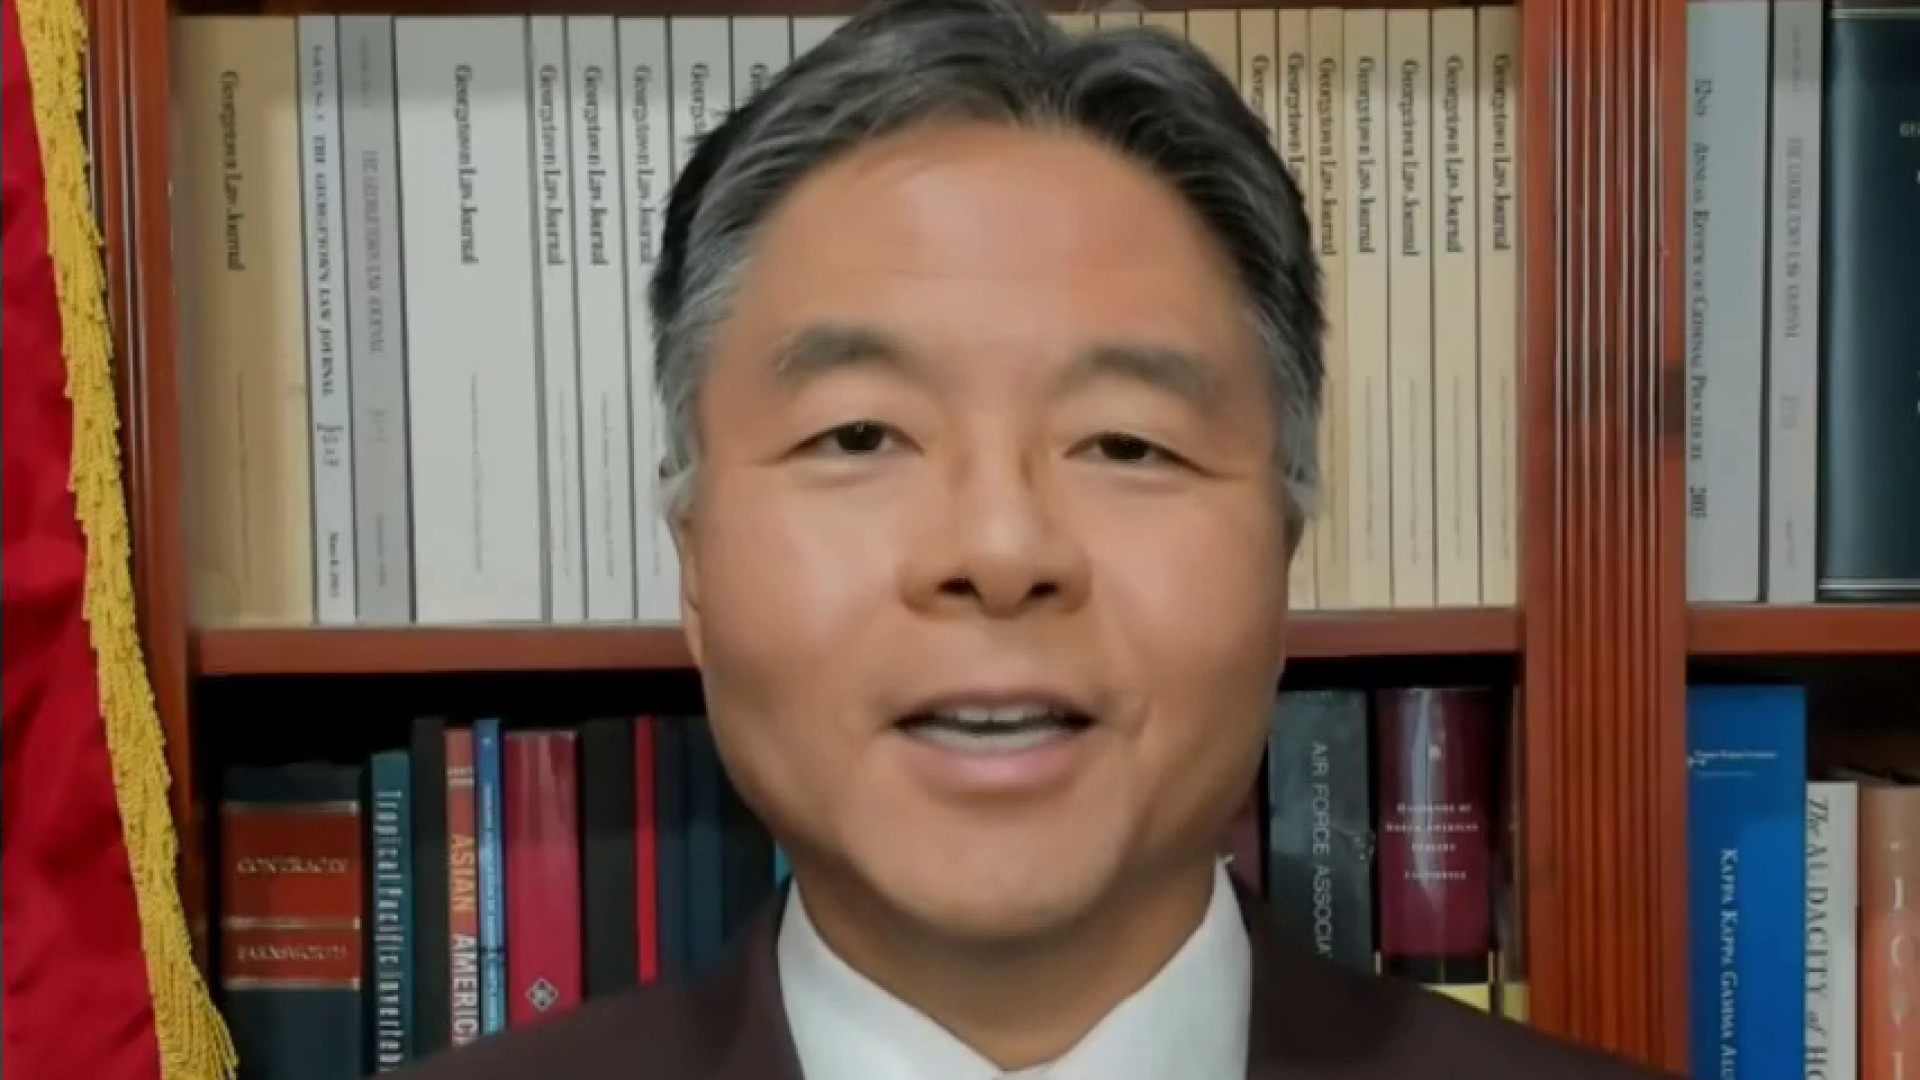 Rep. Lieu: You if truth be told look how jumpy Republicans are if truth be told of Jan. 6 committee